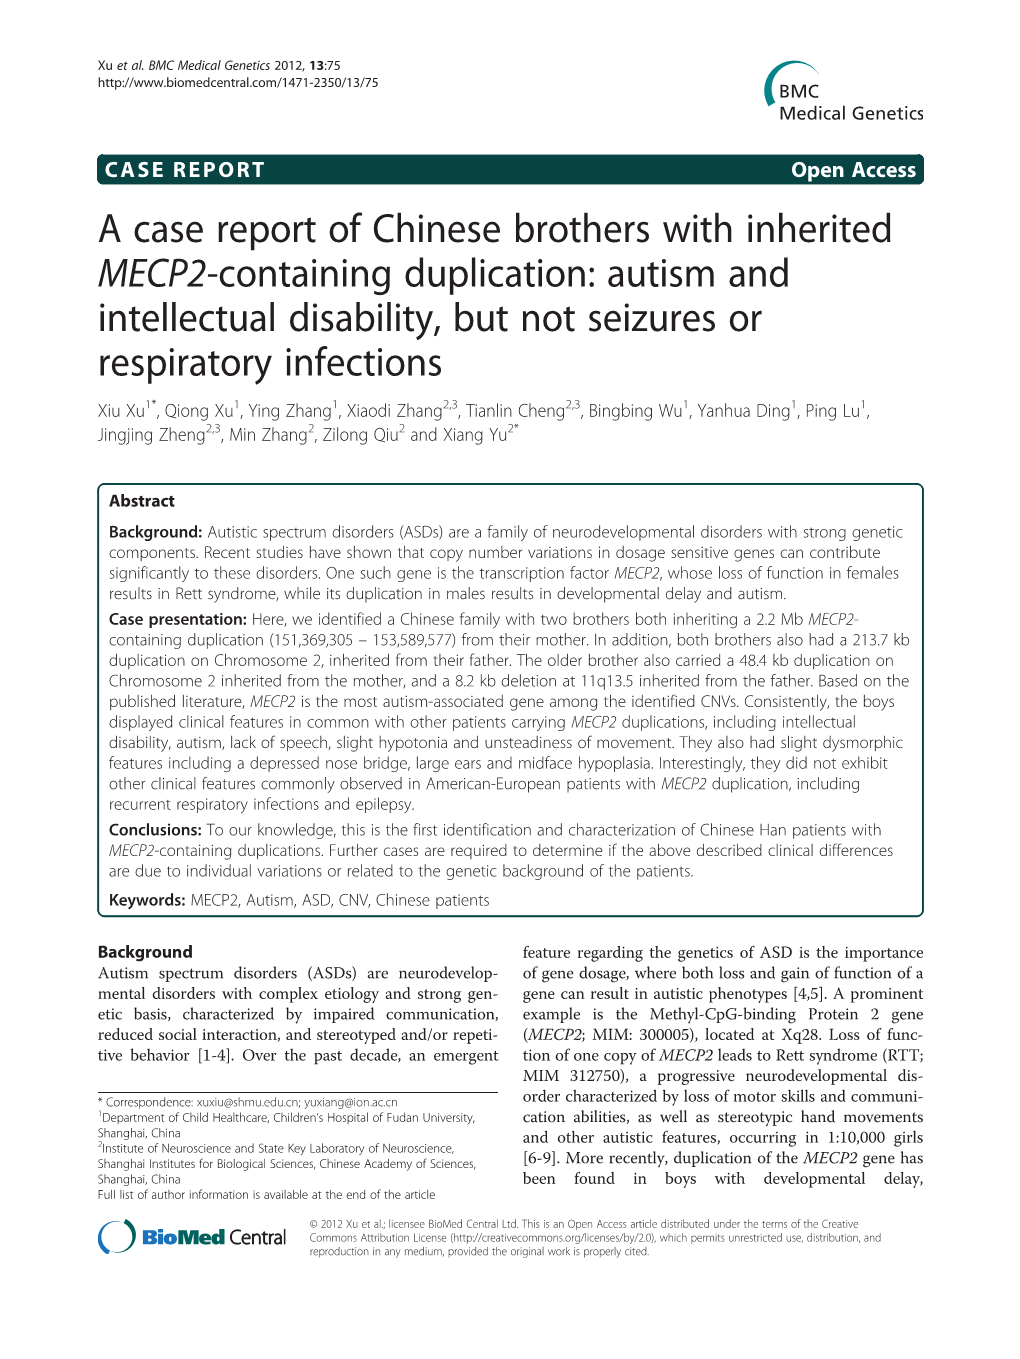 A Case Report of Chinese Brothers with Inherited MECP2-Containing Duplication: Autism and Intellectual Disability, but Not Seizu